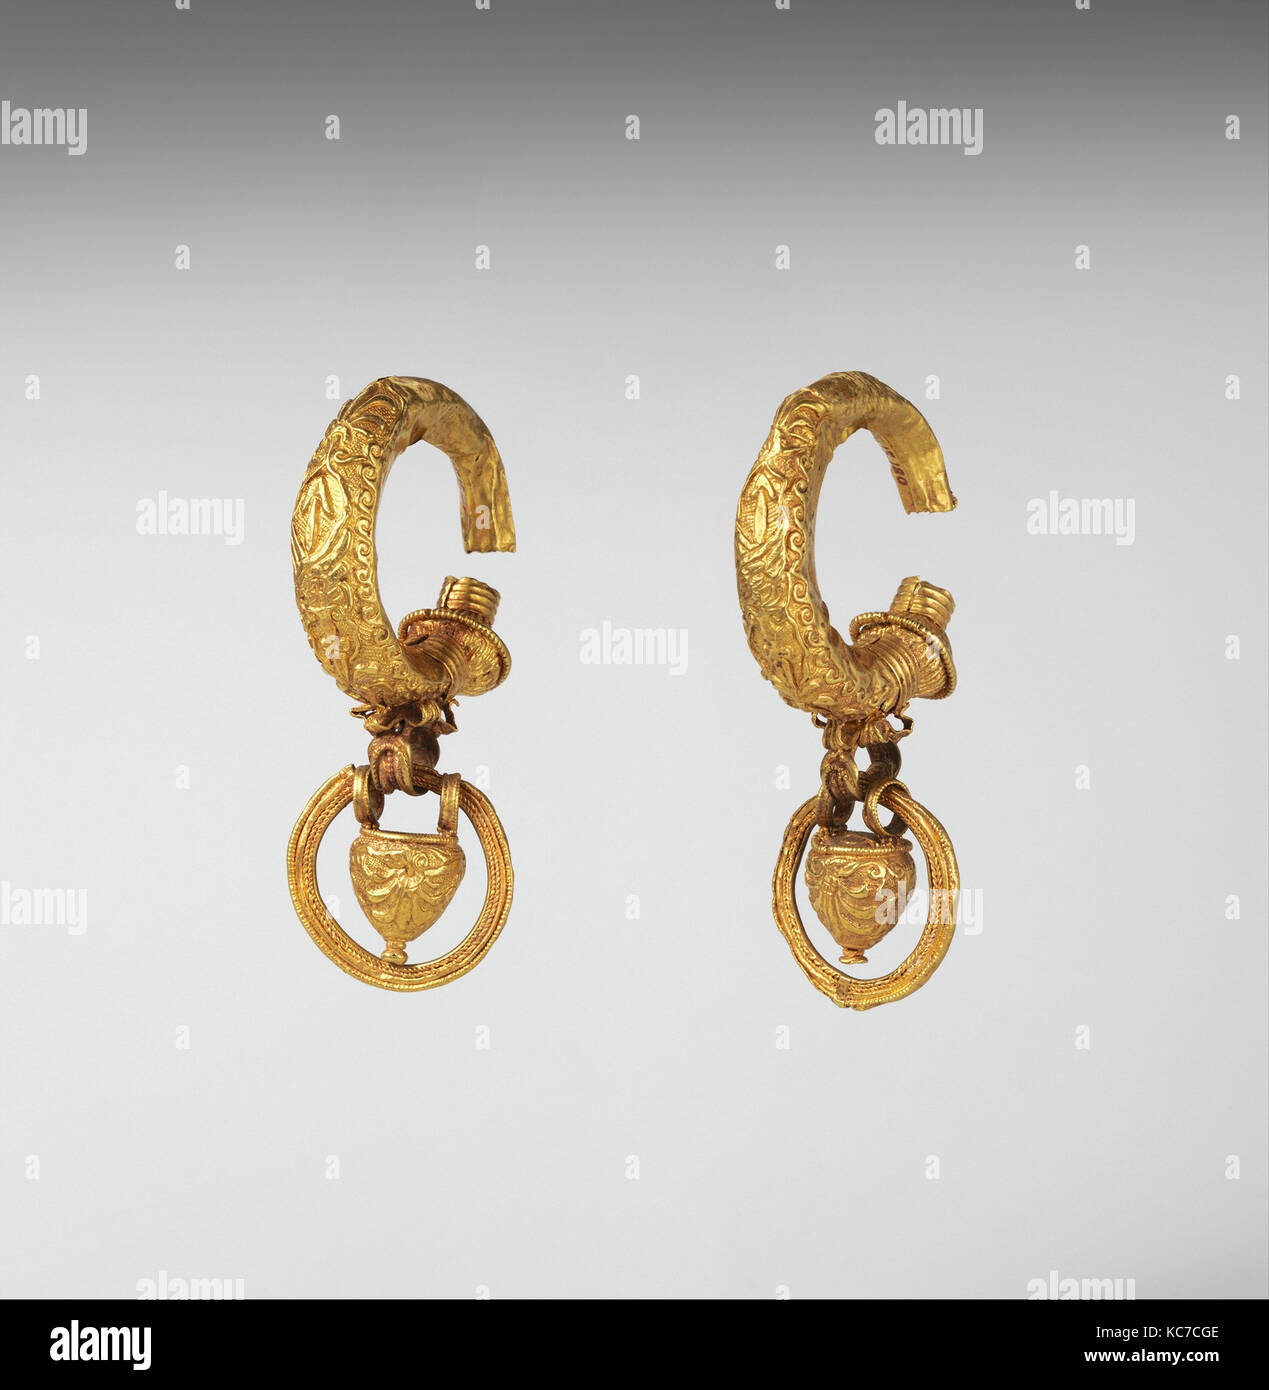 Made In China 3D Rose Gold| Alibaba.com